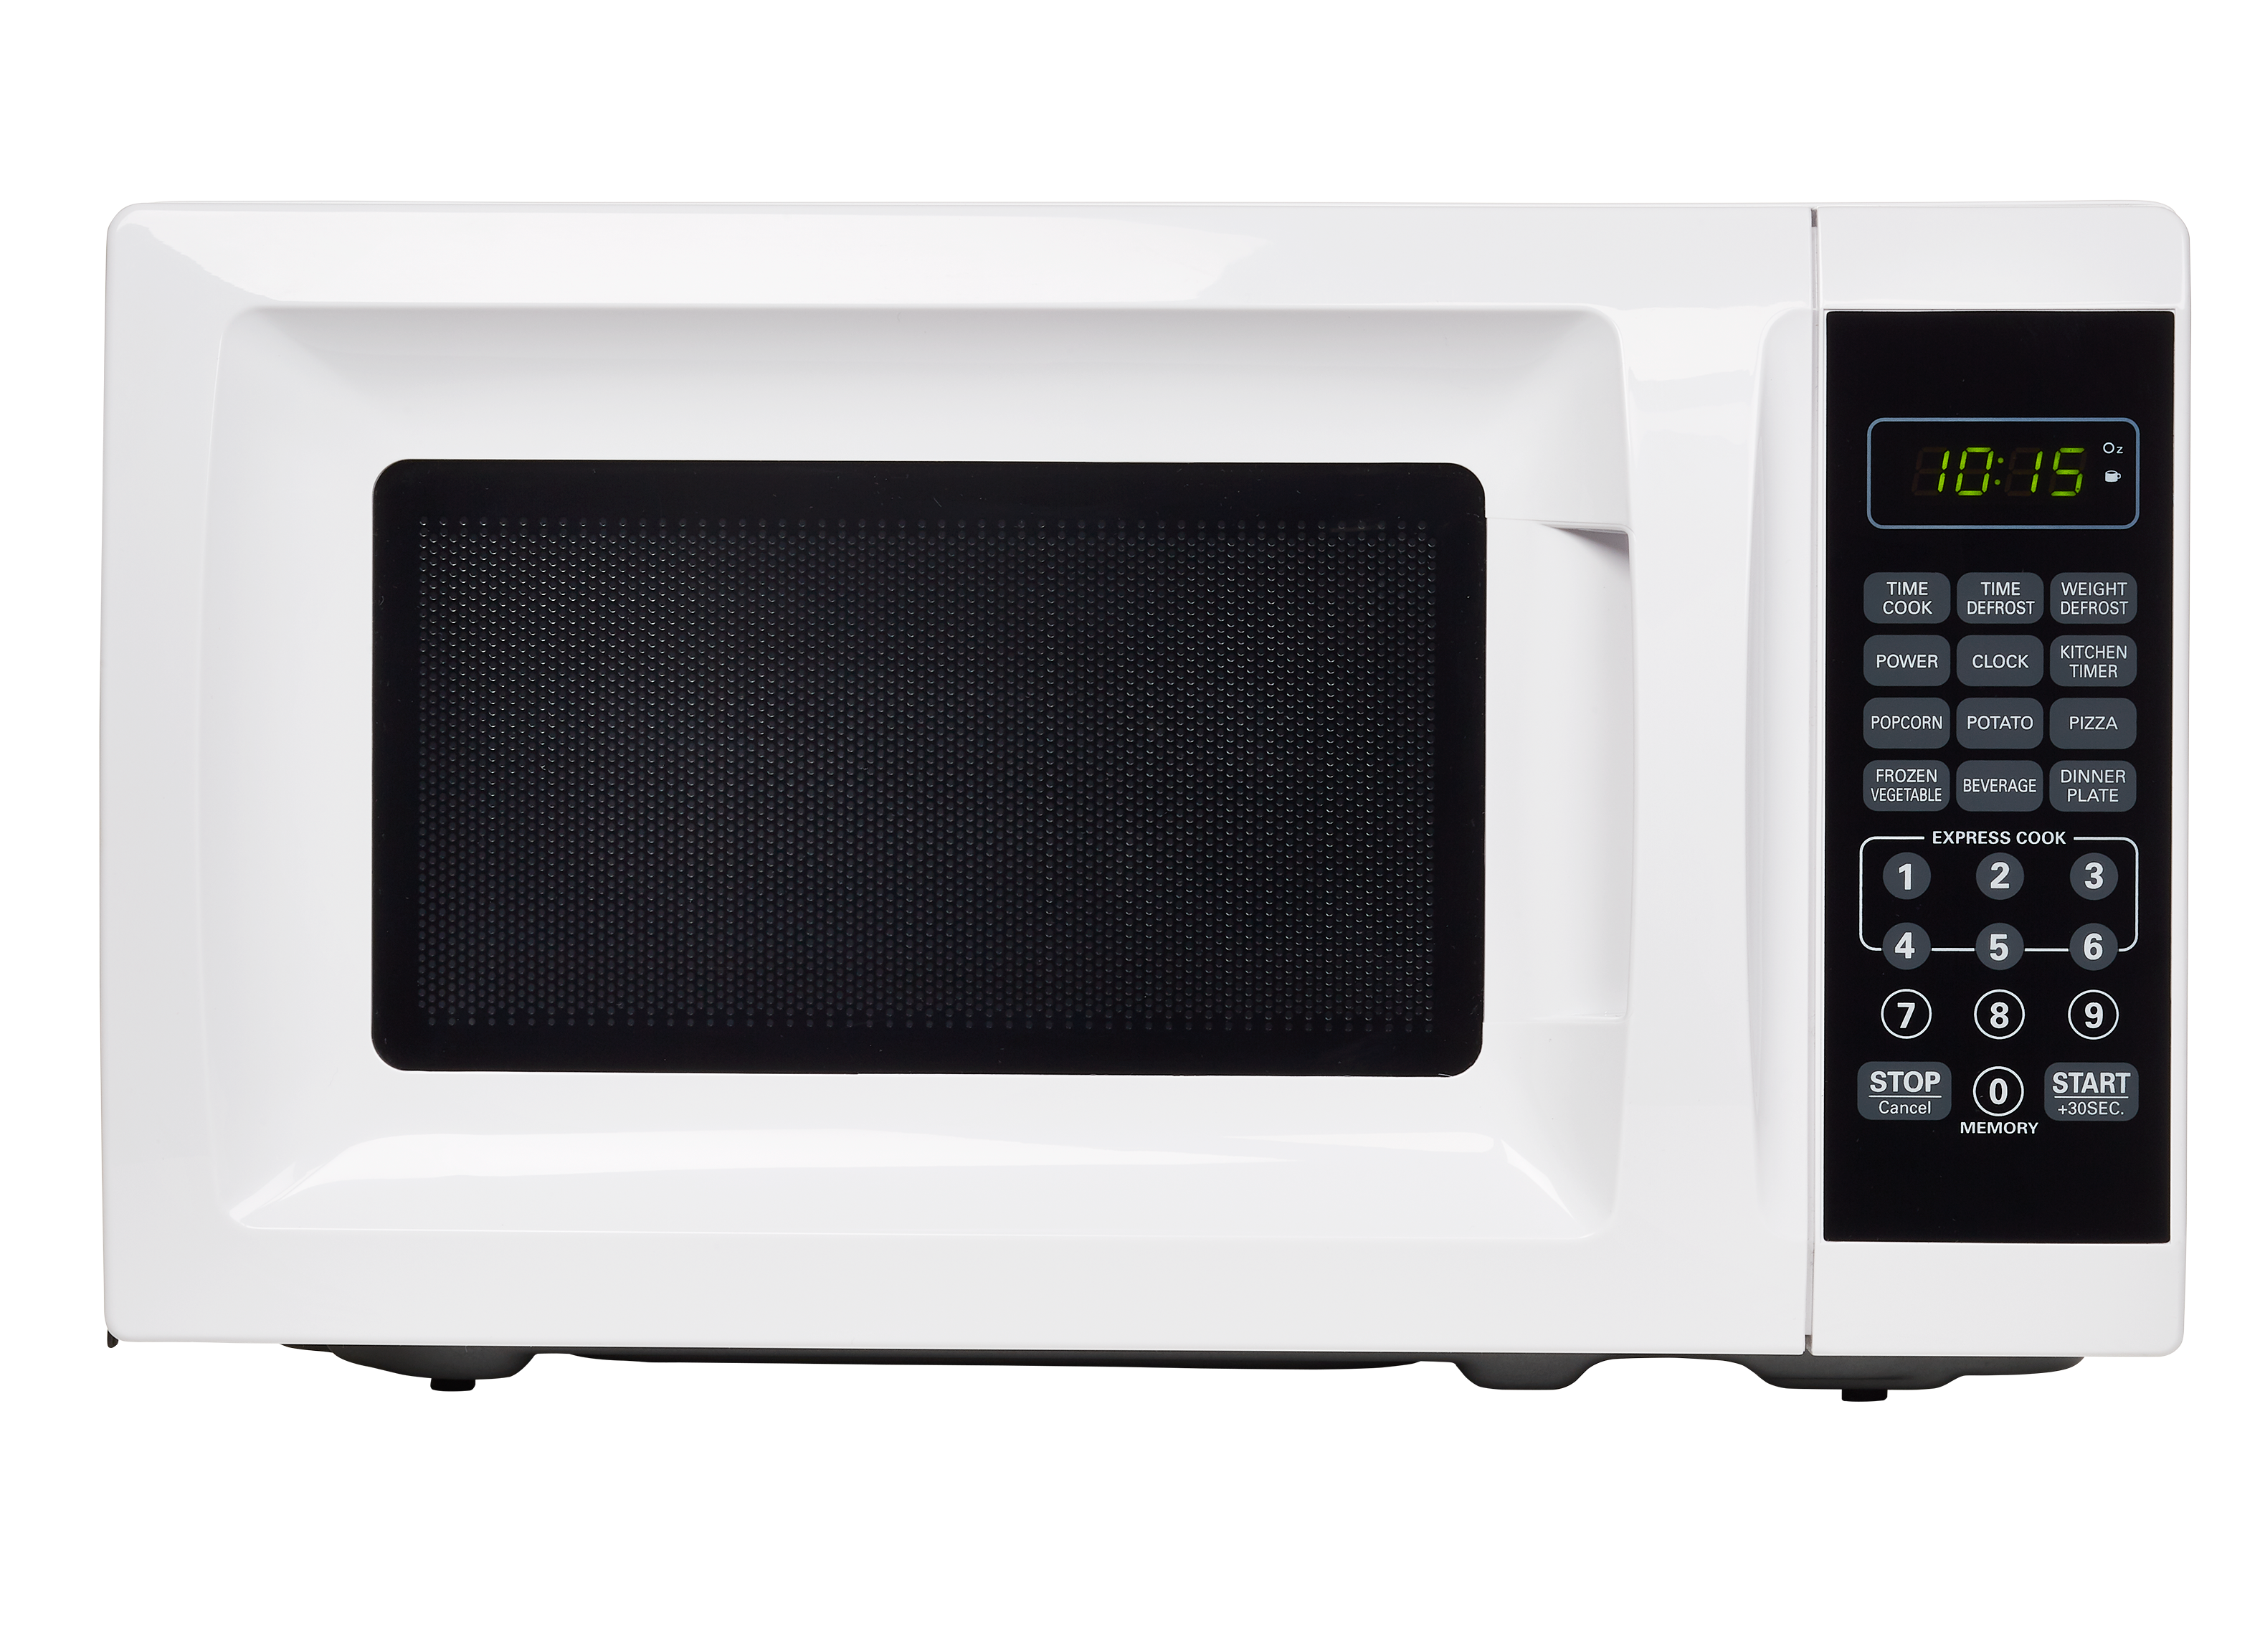 Mainstays 1.1 cu. ft. Countertop Microwave Oven, 1000 Watts, Black, New 